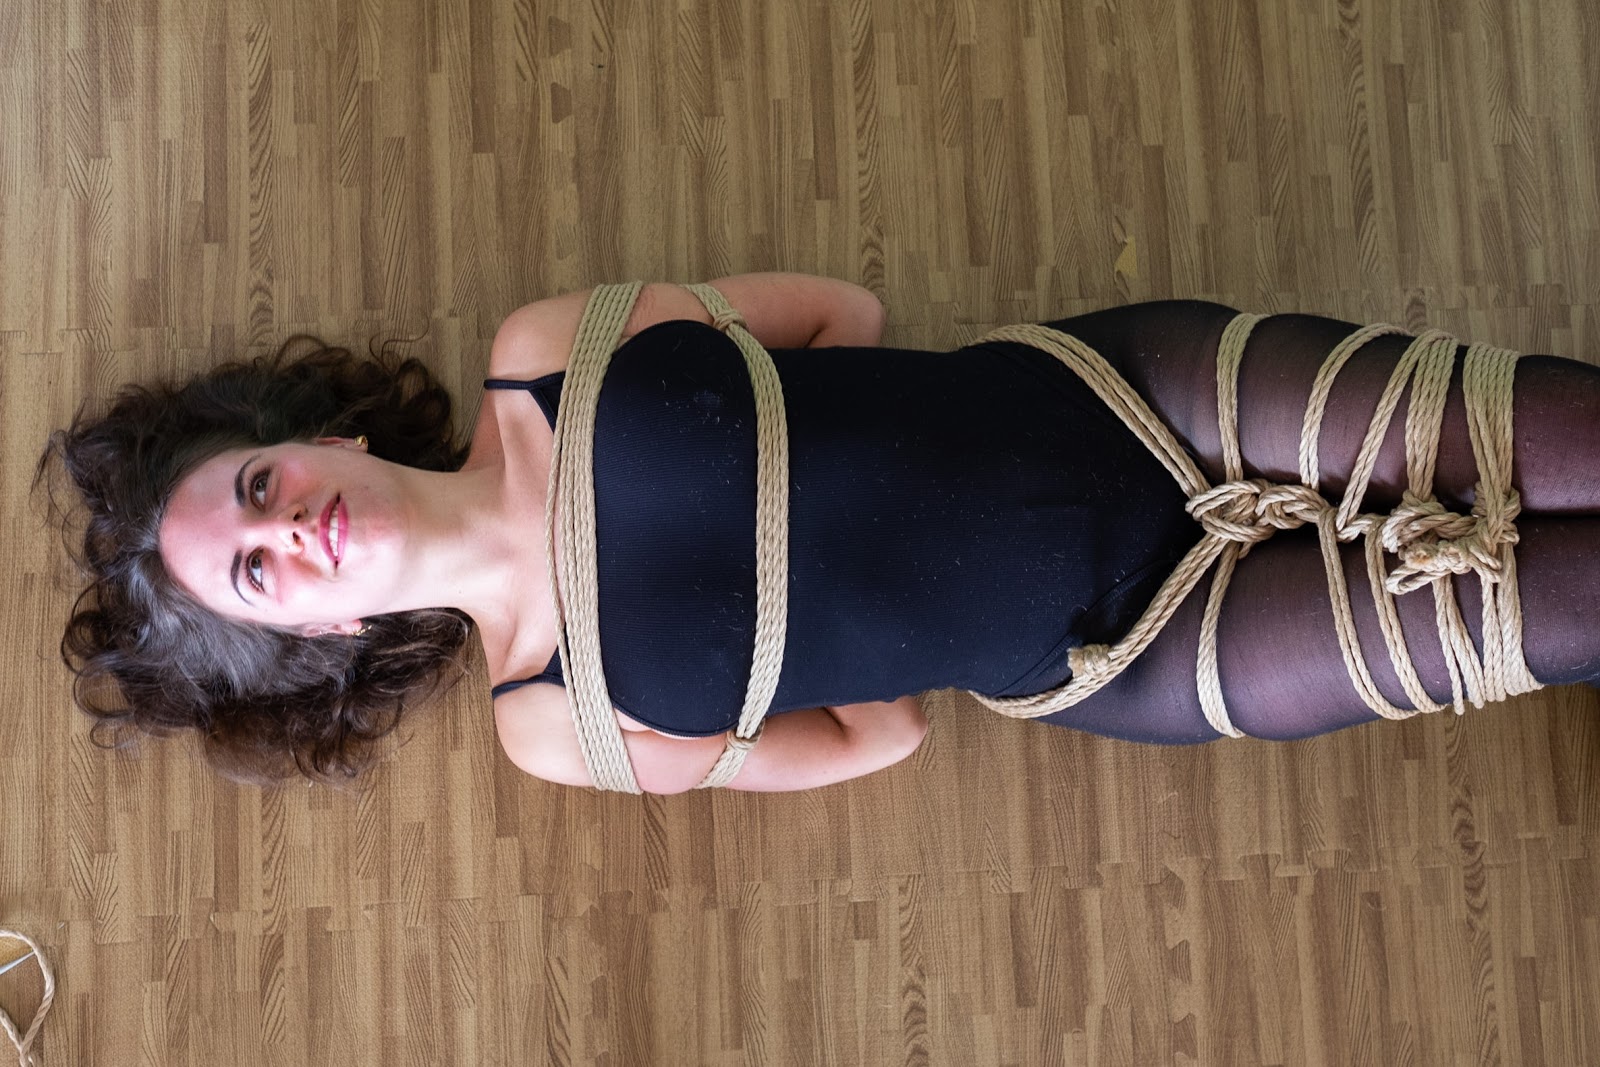 I Tried Japanese Bondage to Learn About the Beauty of Getting Tied Up